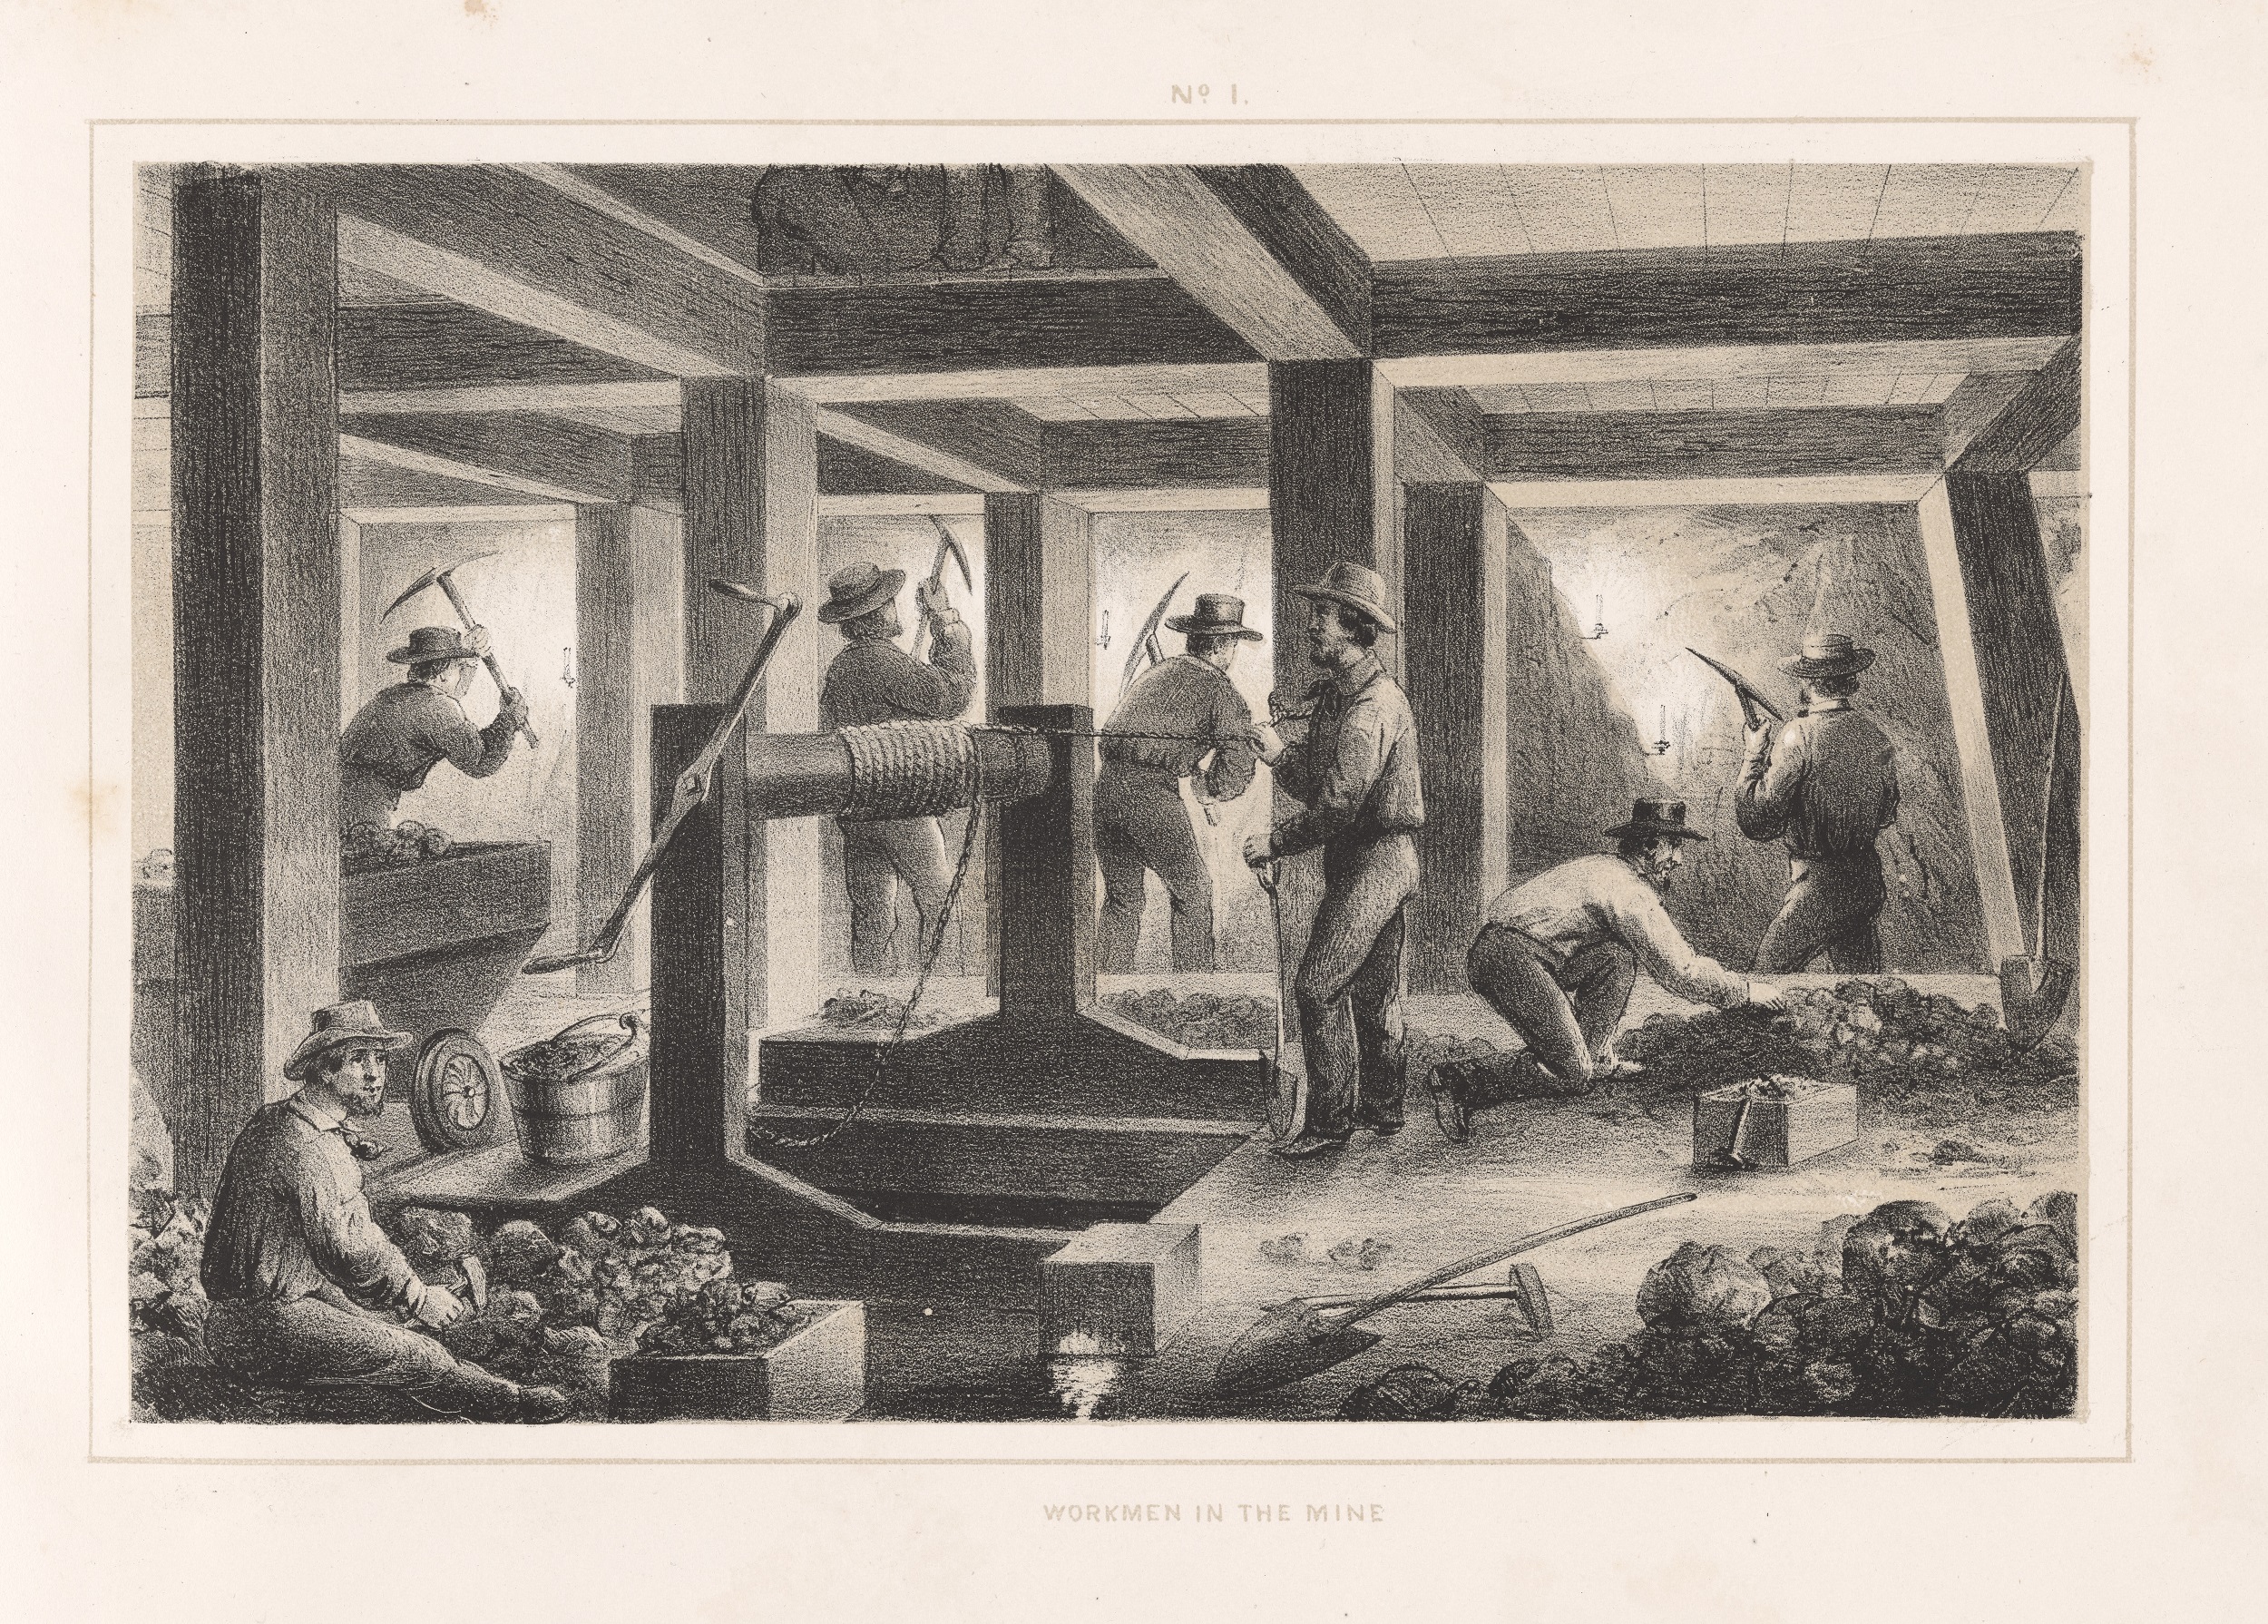 Black-and-white lithograph of seven men working the subterranean area of a mine with pickaxes. A large windlass is in the center.